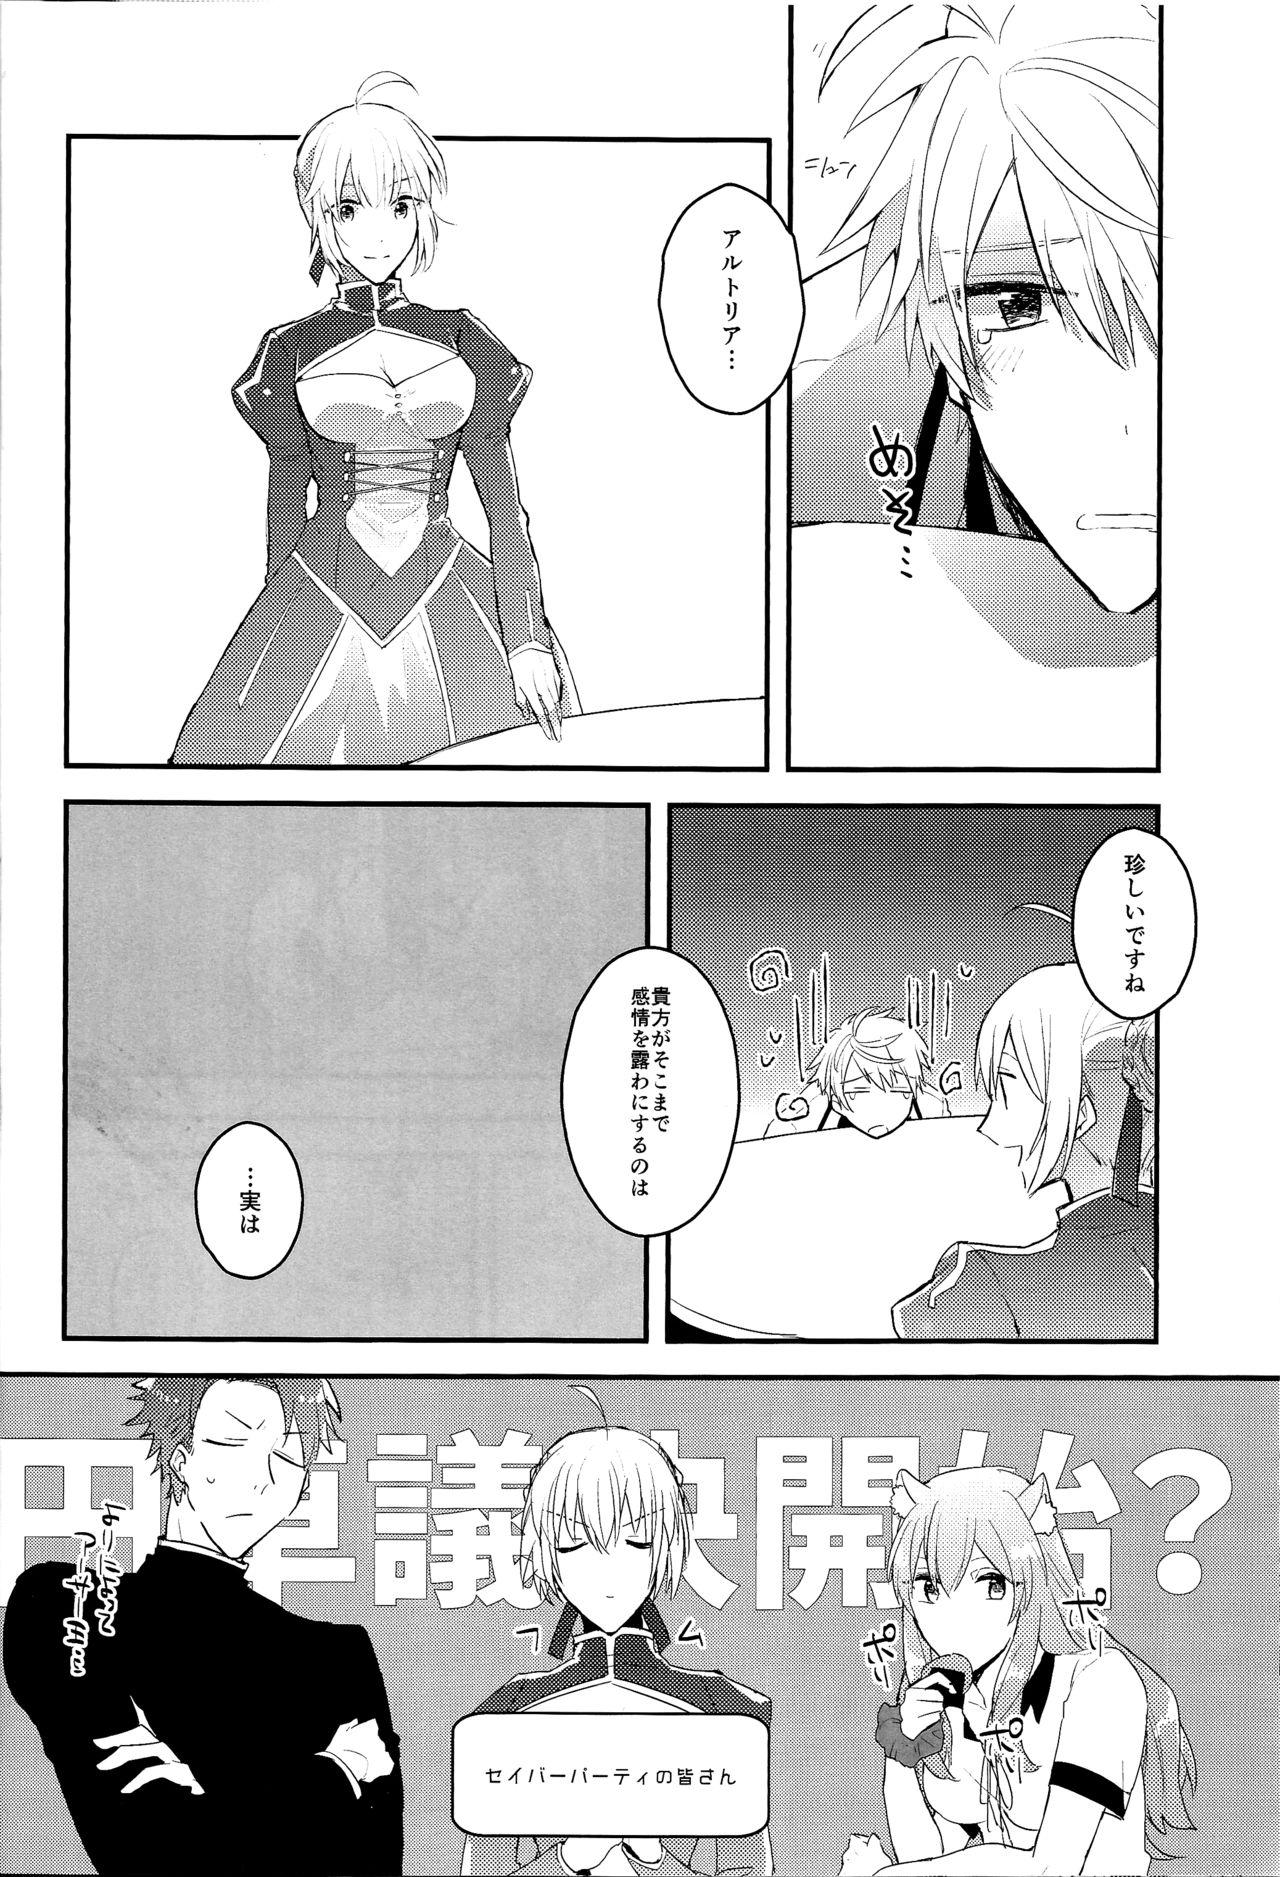 Putas I Am Worthy Of You - Fate grand order Passion - Page 5